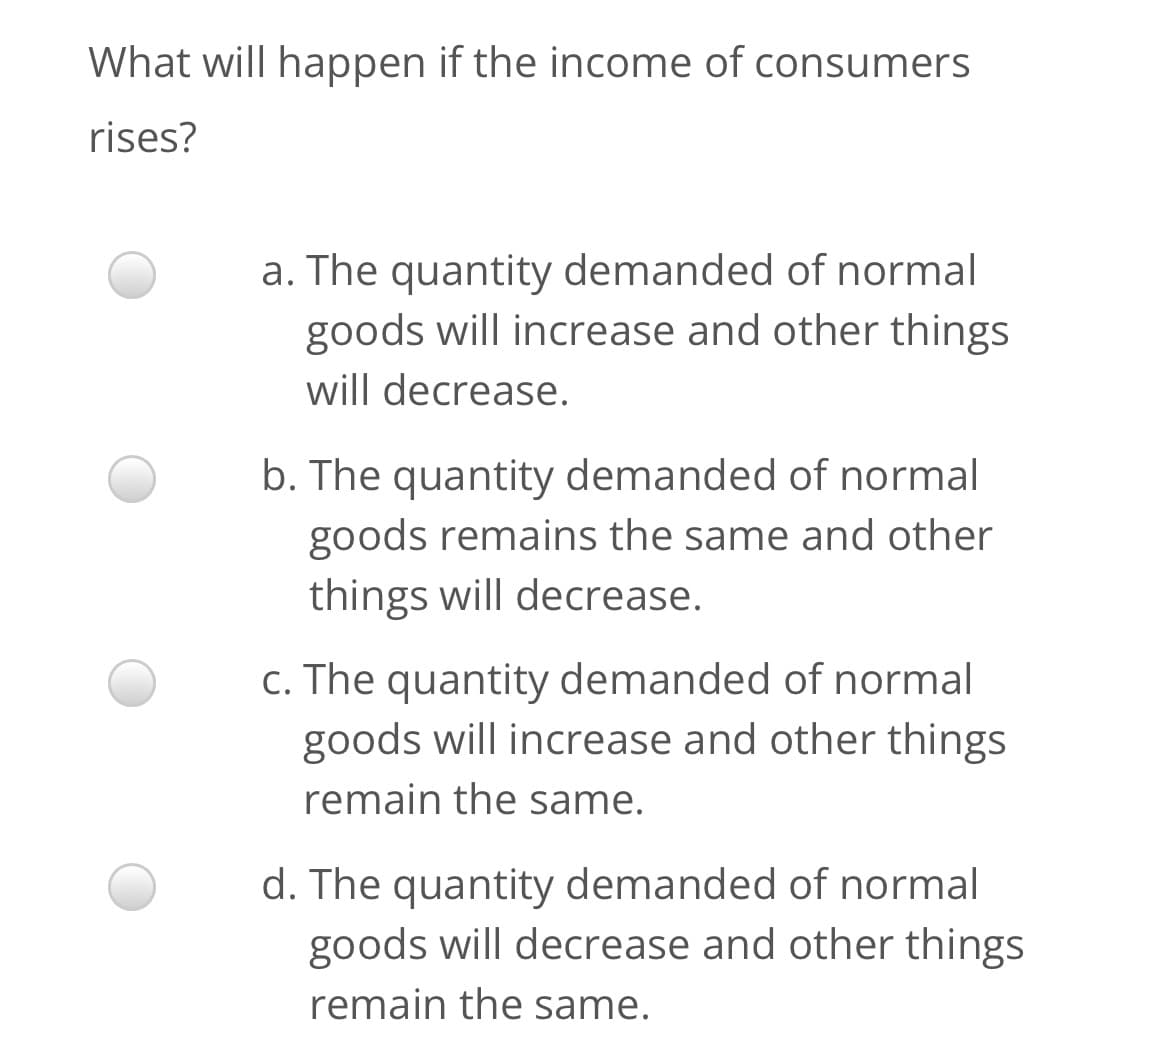 What will happen if the income of consumers
rises?
a. The quantity demanded of normal
goods will increase and other things
will decrease.
b. The quantity demanded of normal
goods remains the same and other
things will decrease.
c. The quantity demanded of normal
goods will increase and other things
remain the same.
d. The quantity demanded of normal
goods will decrease and other things
remain the same.
